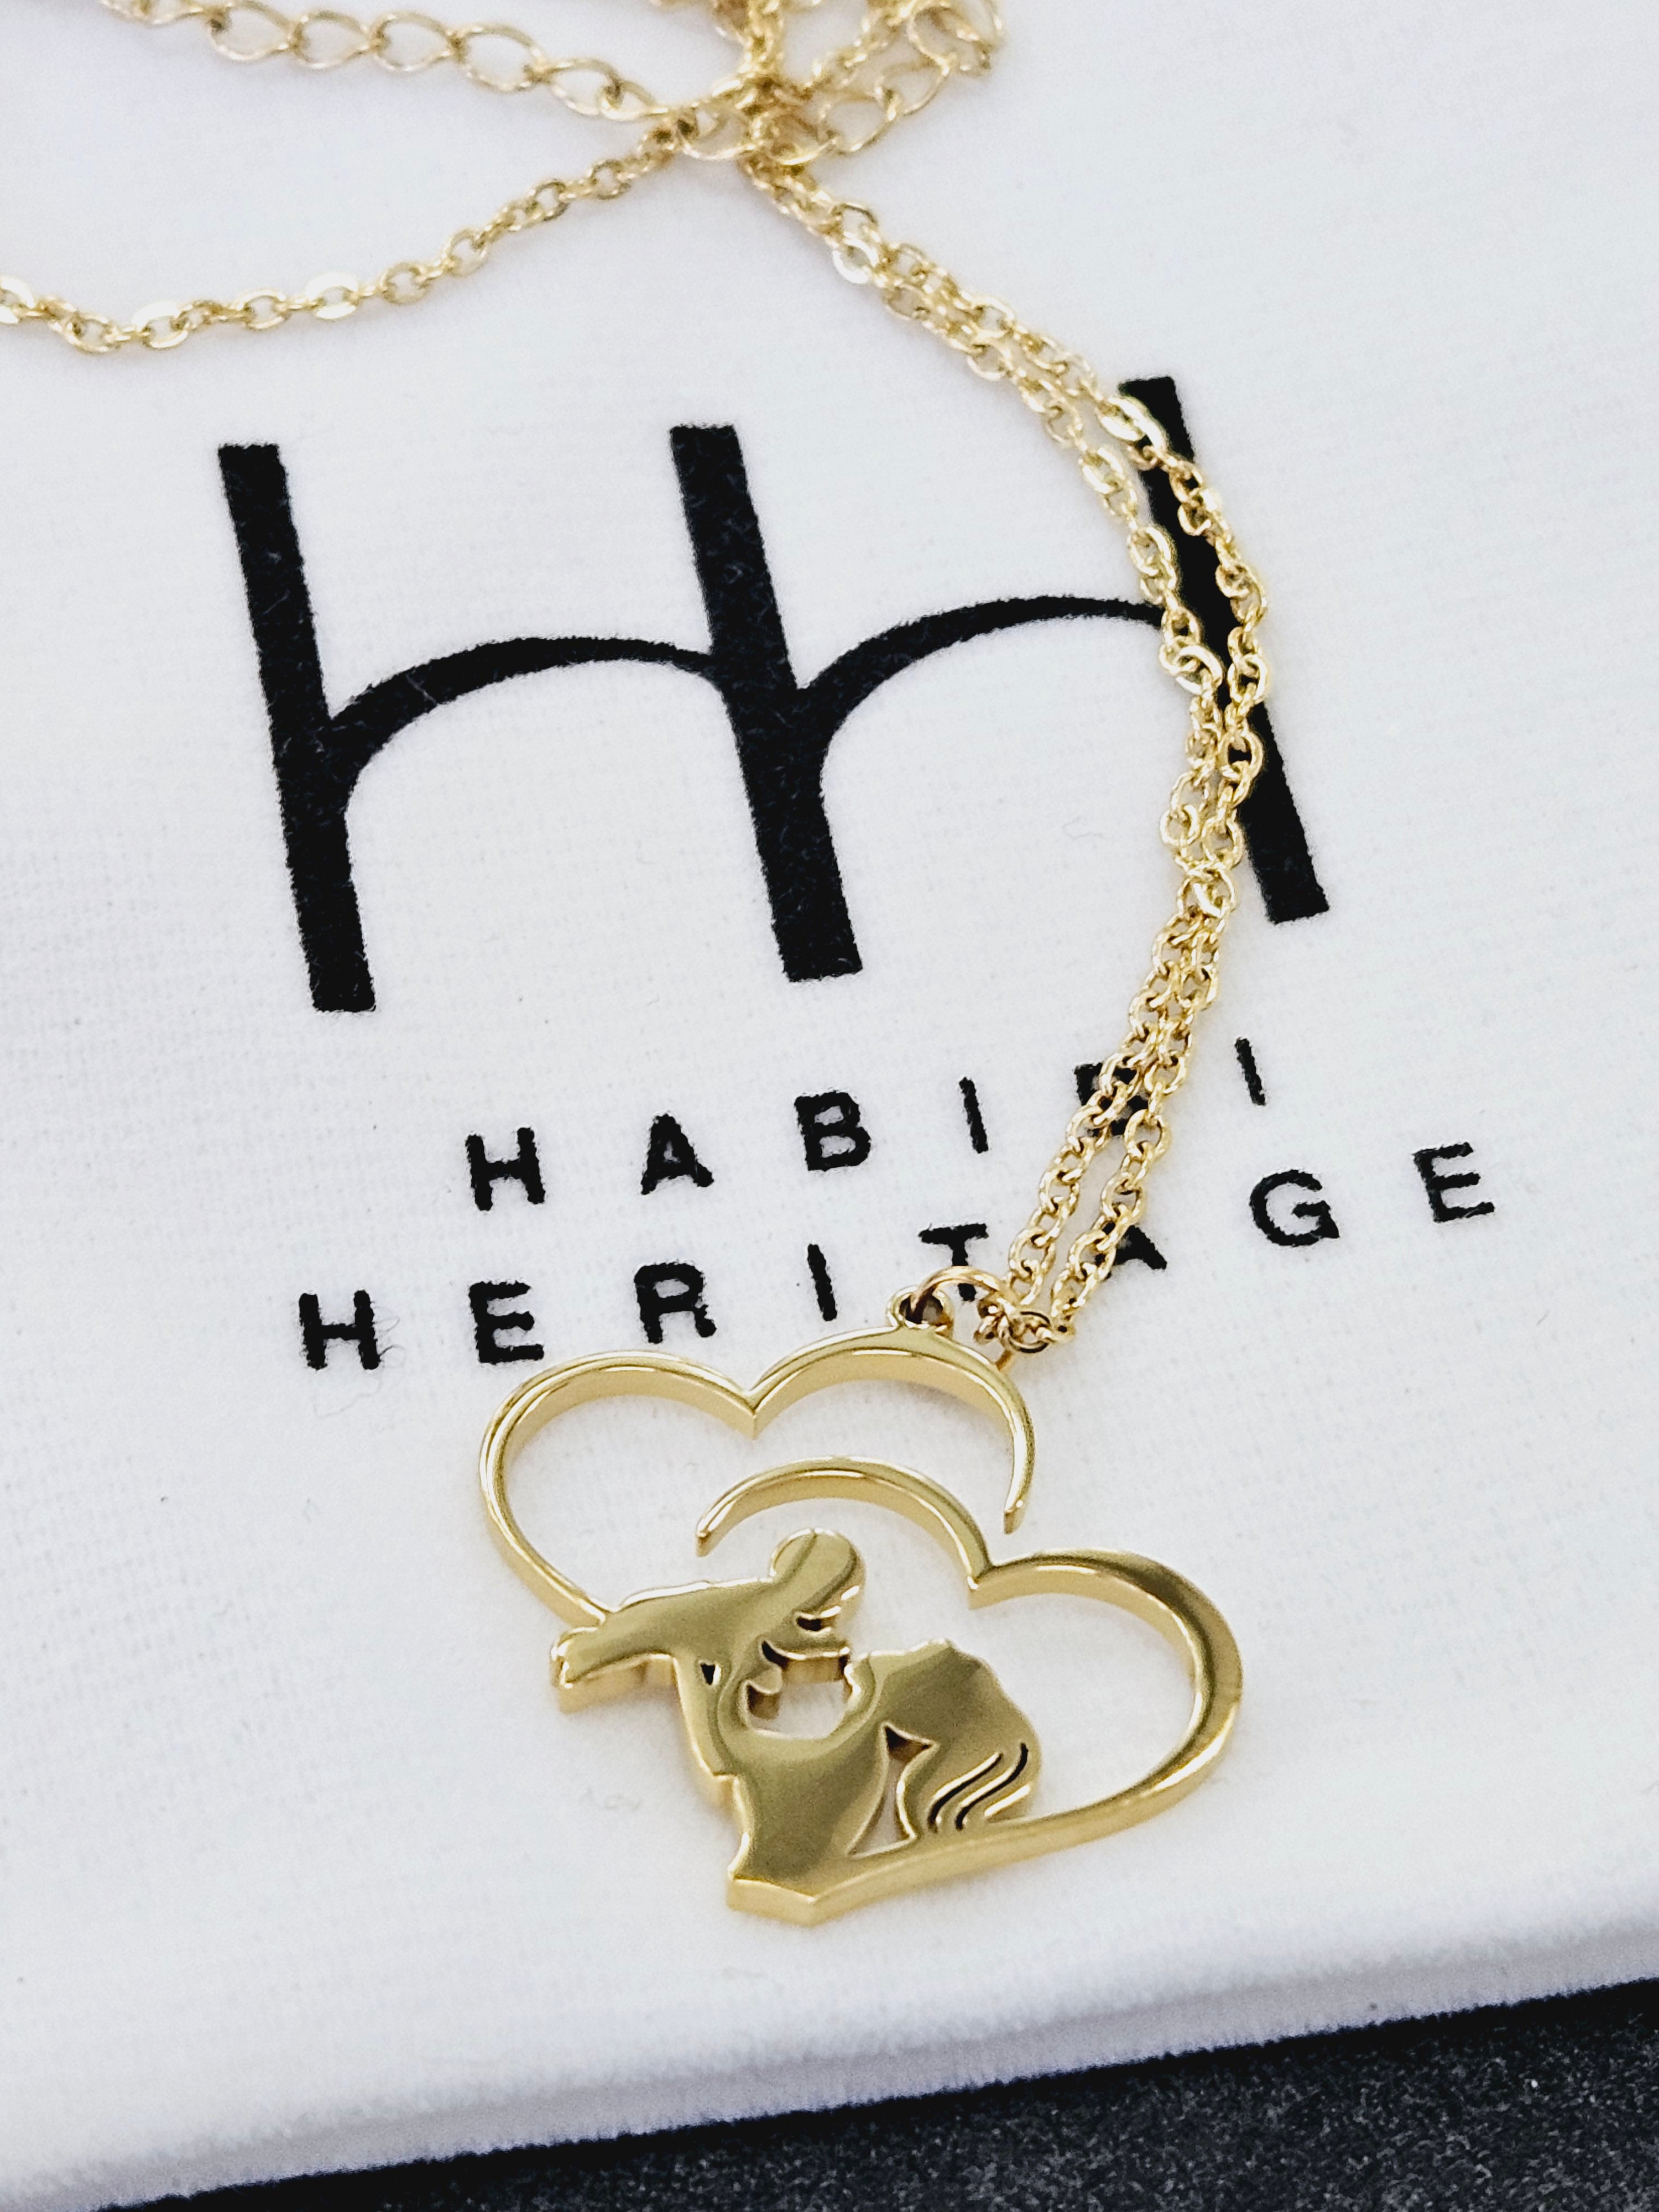 Mother Daughter Necklace - Habibi Heritage